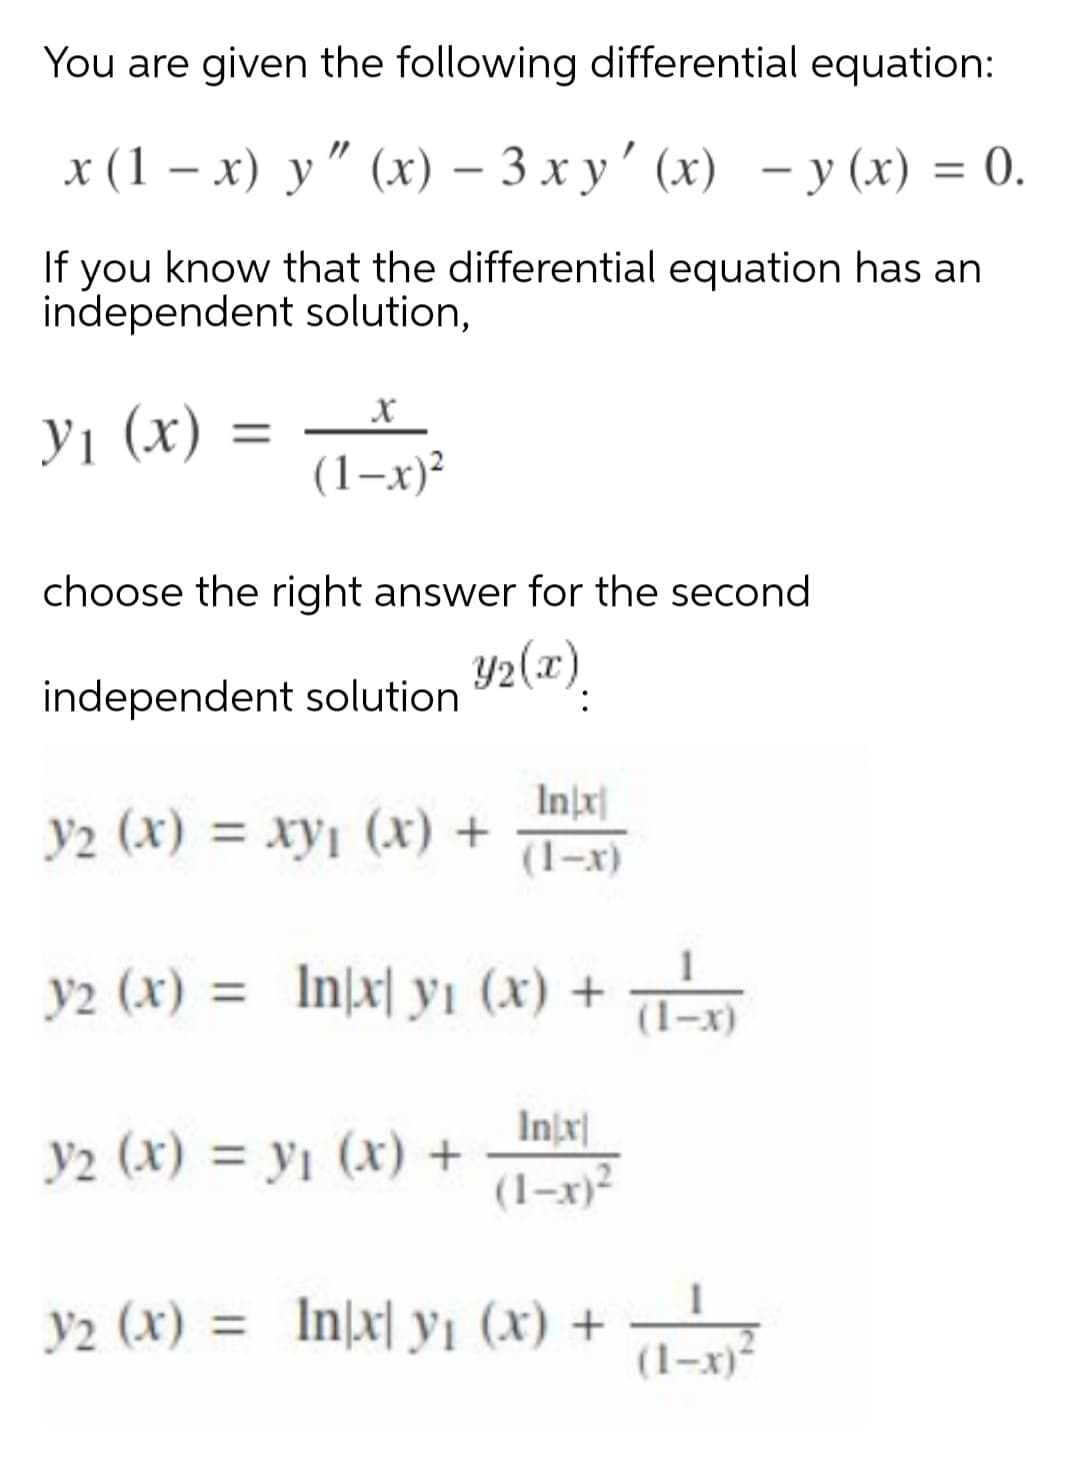 You are given the following differential equation:
x (1 – x) y" (x) – 3 x y' (x) - y (x) = 0.
— у (х) %3D 0.
|
If you know that the differential equation has an
independent solution,
У1 (х)
(1-х)?
choose the right answer for the second
independent solution 2(x).
Inj
y2 (x) = xy, (x) +
(1-x)
y2 (x) = In[x| yı (x) +
(1-x)
Injx|
y2 (x) = y1 (x) +
(1–x)²
y2 (x) = In]x| y1 (x) +
(1-x)
%3D
